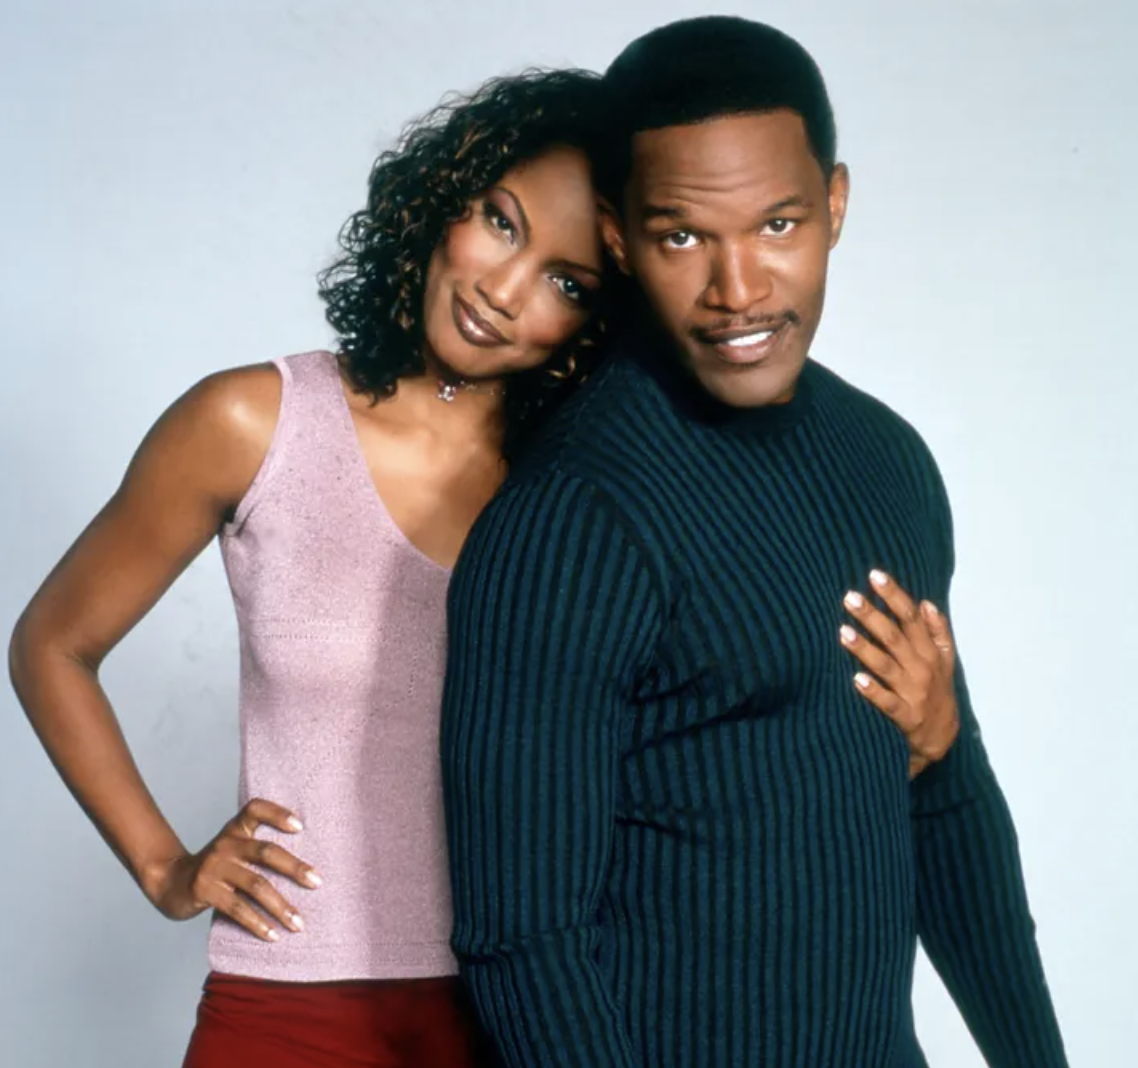 Two individuals posing together, one in a sparkly sleeveless top and red pants, and the other in a ribbed sweater